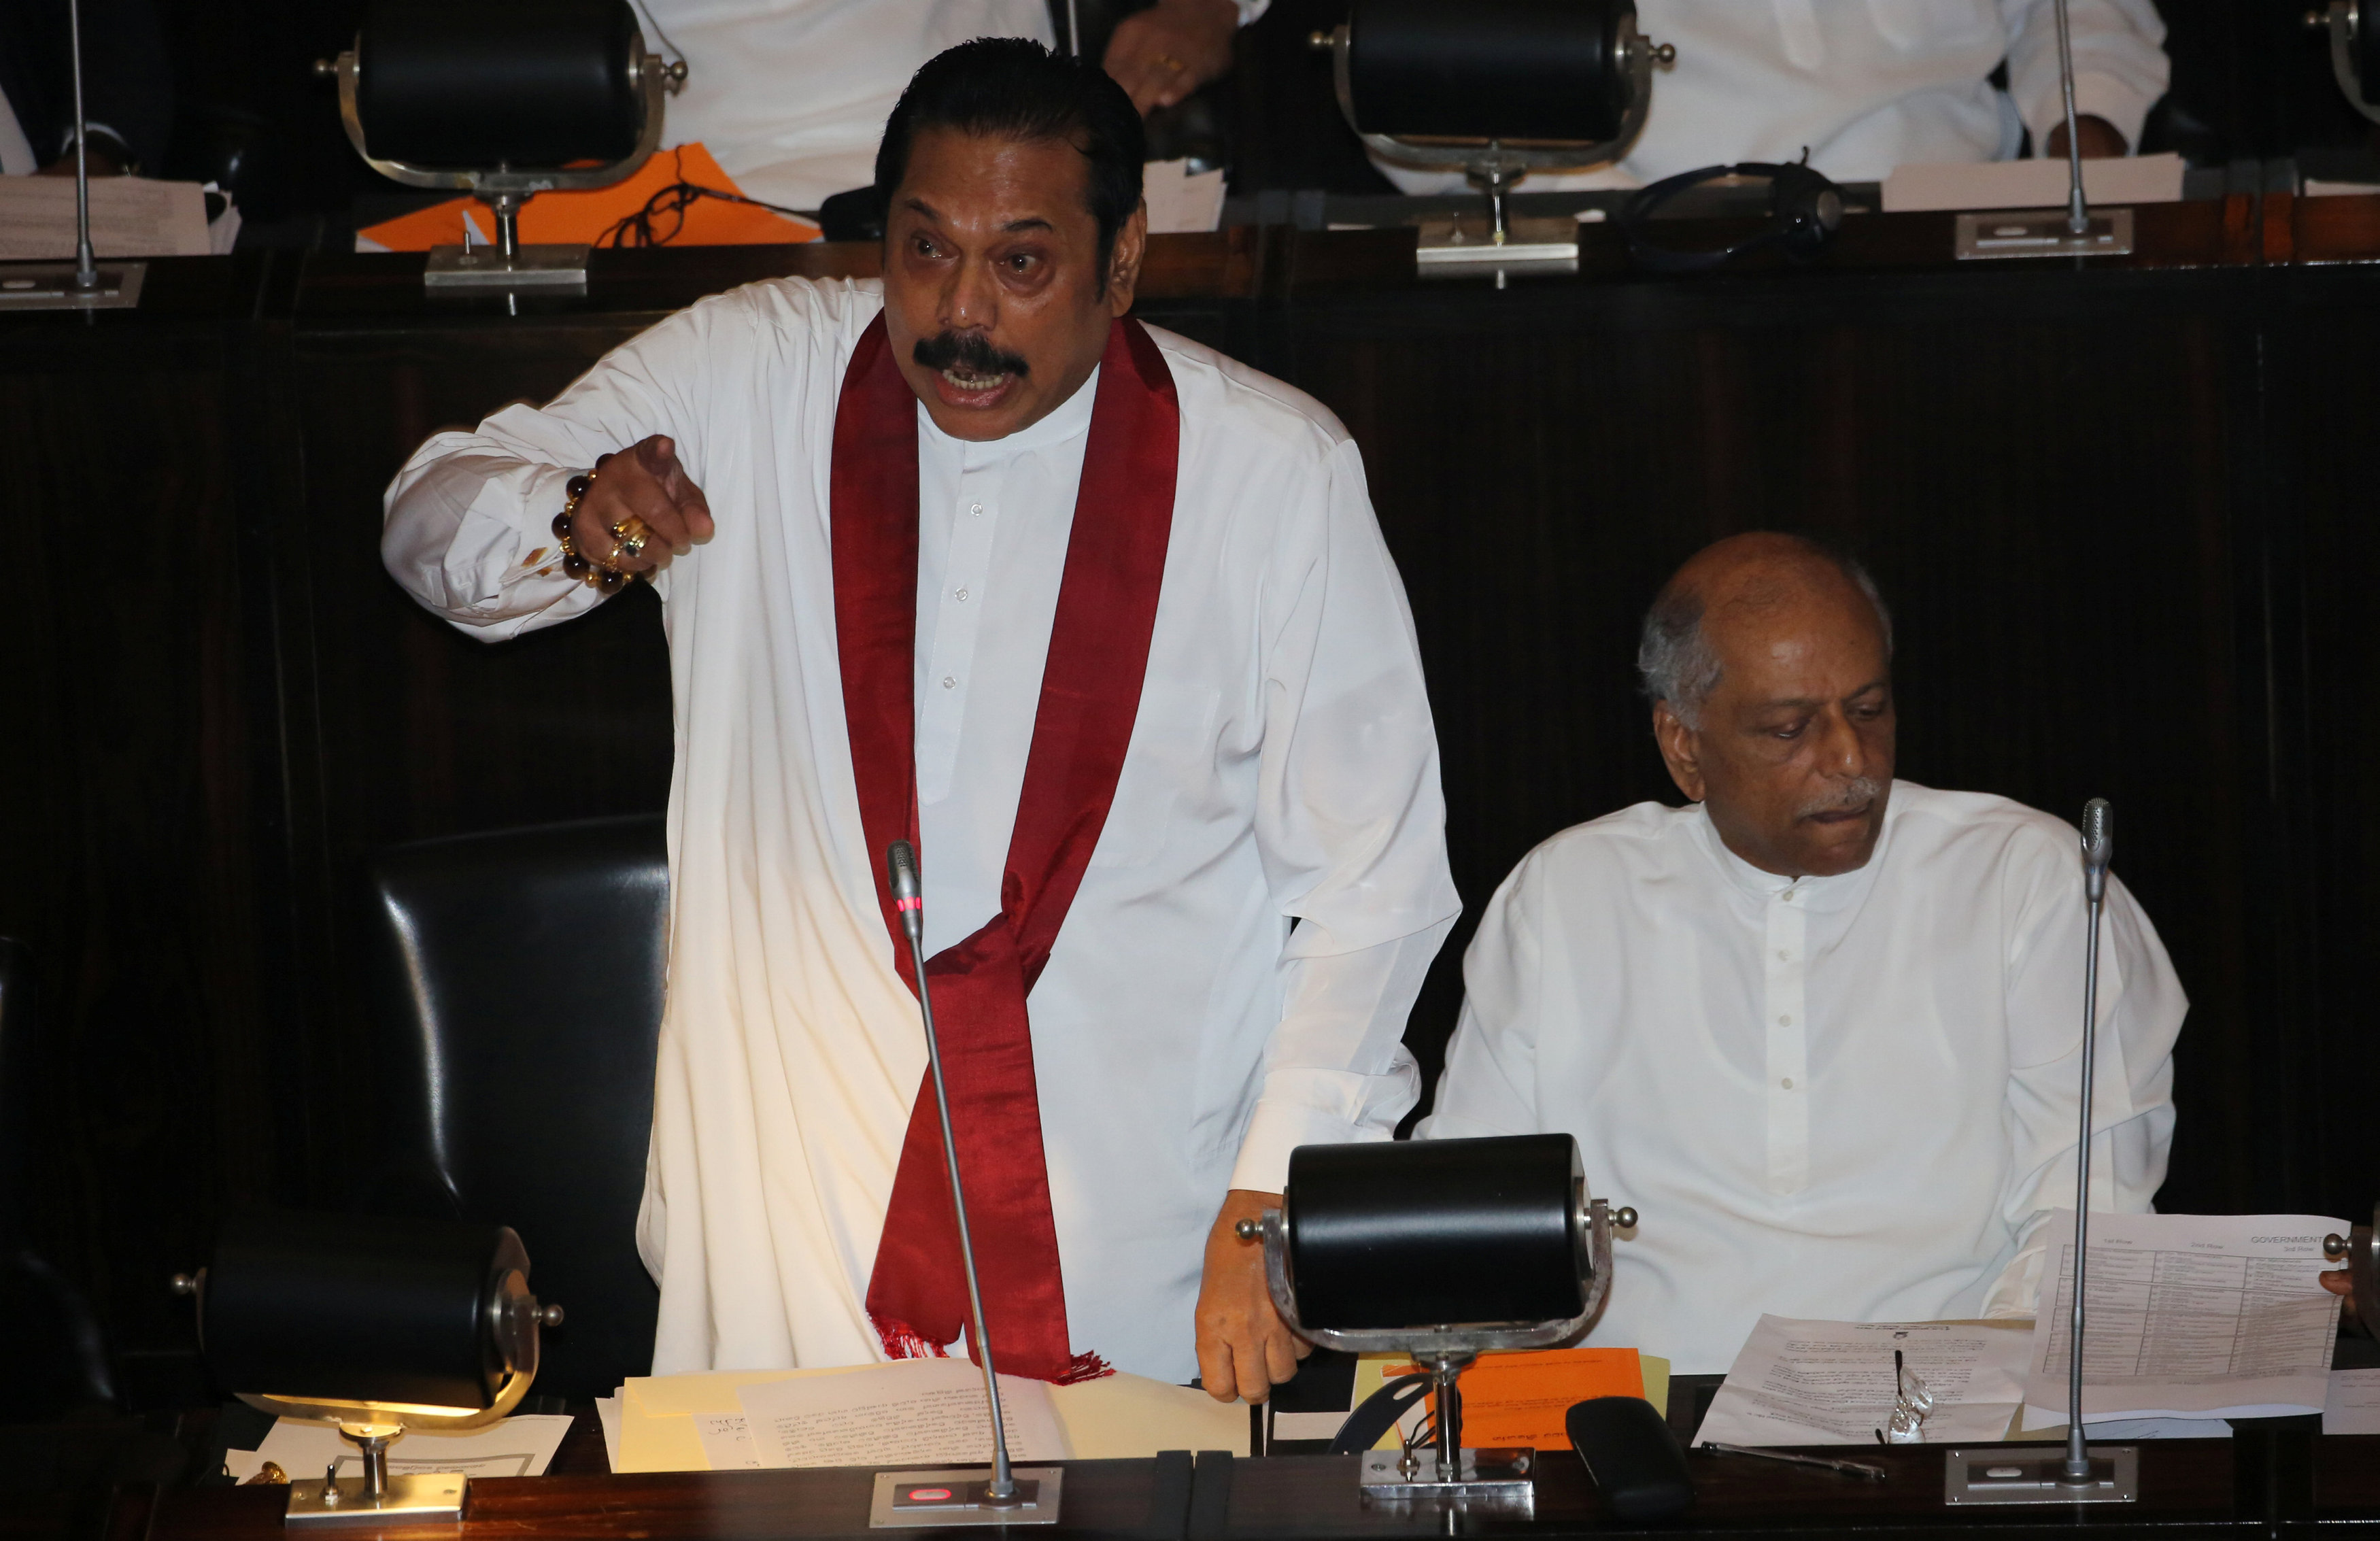 Sri Lanka's newly appointed Prime Minister Rajapaksa speaks during the parliament session in Colombo